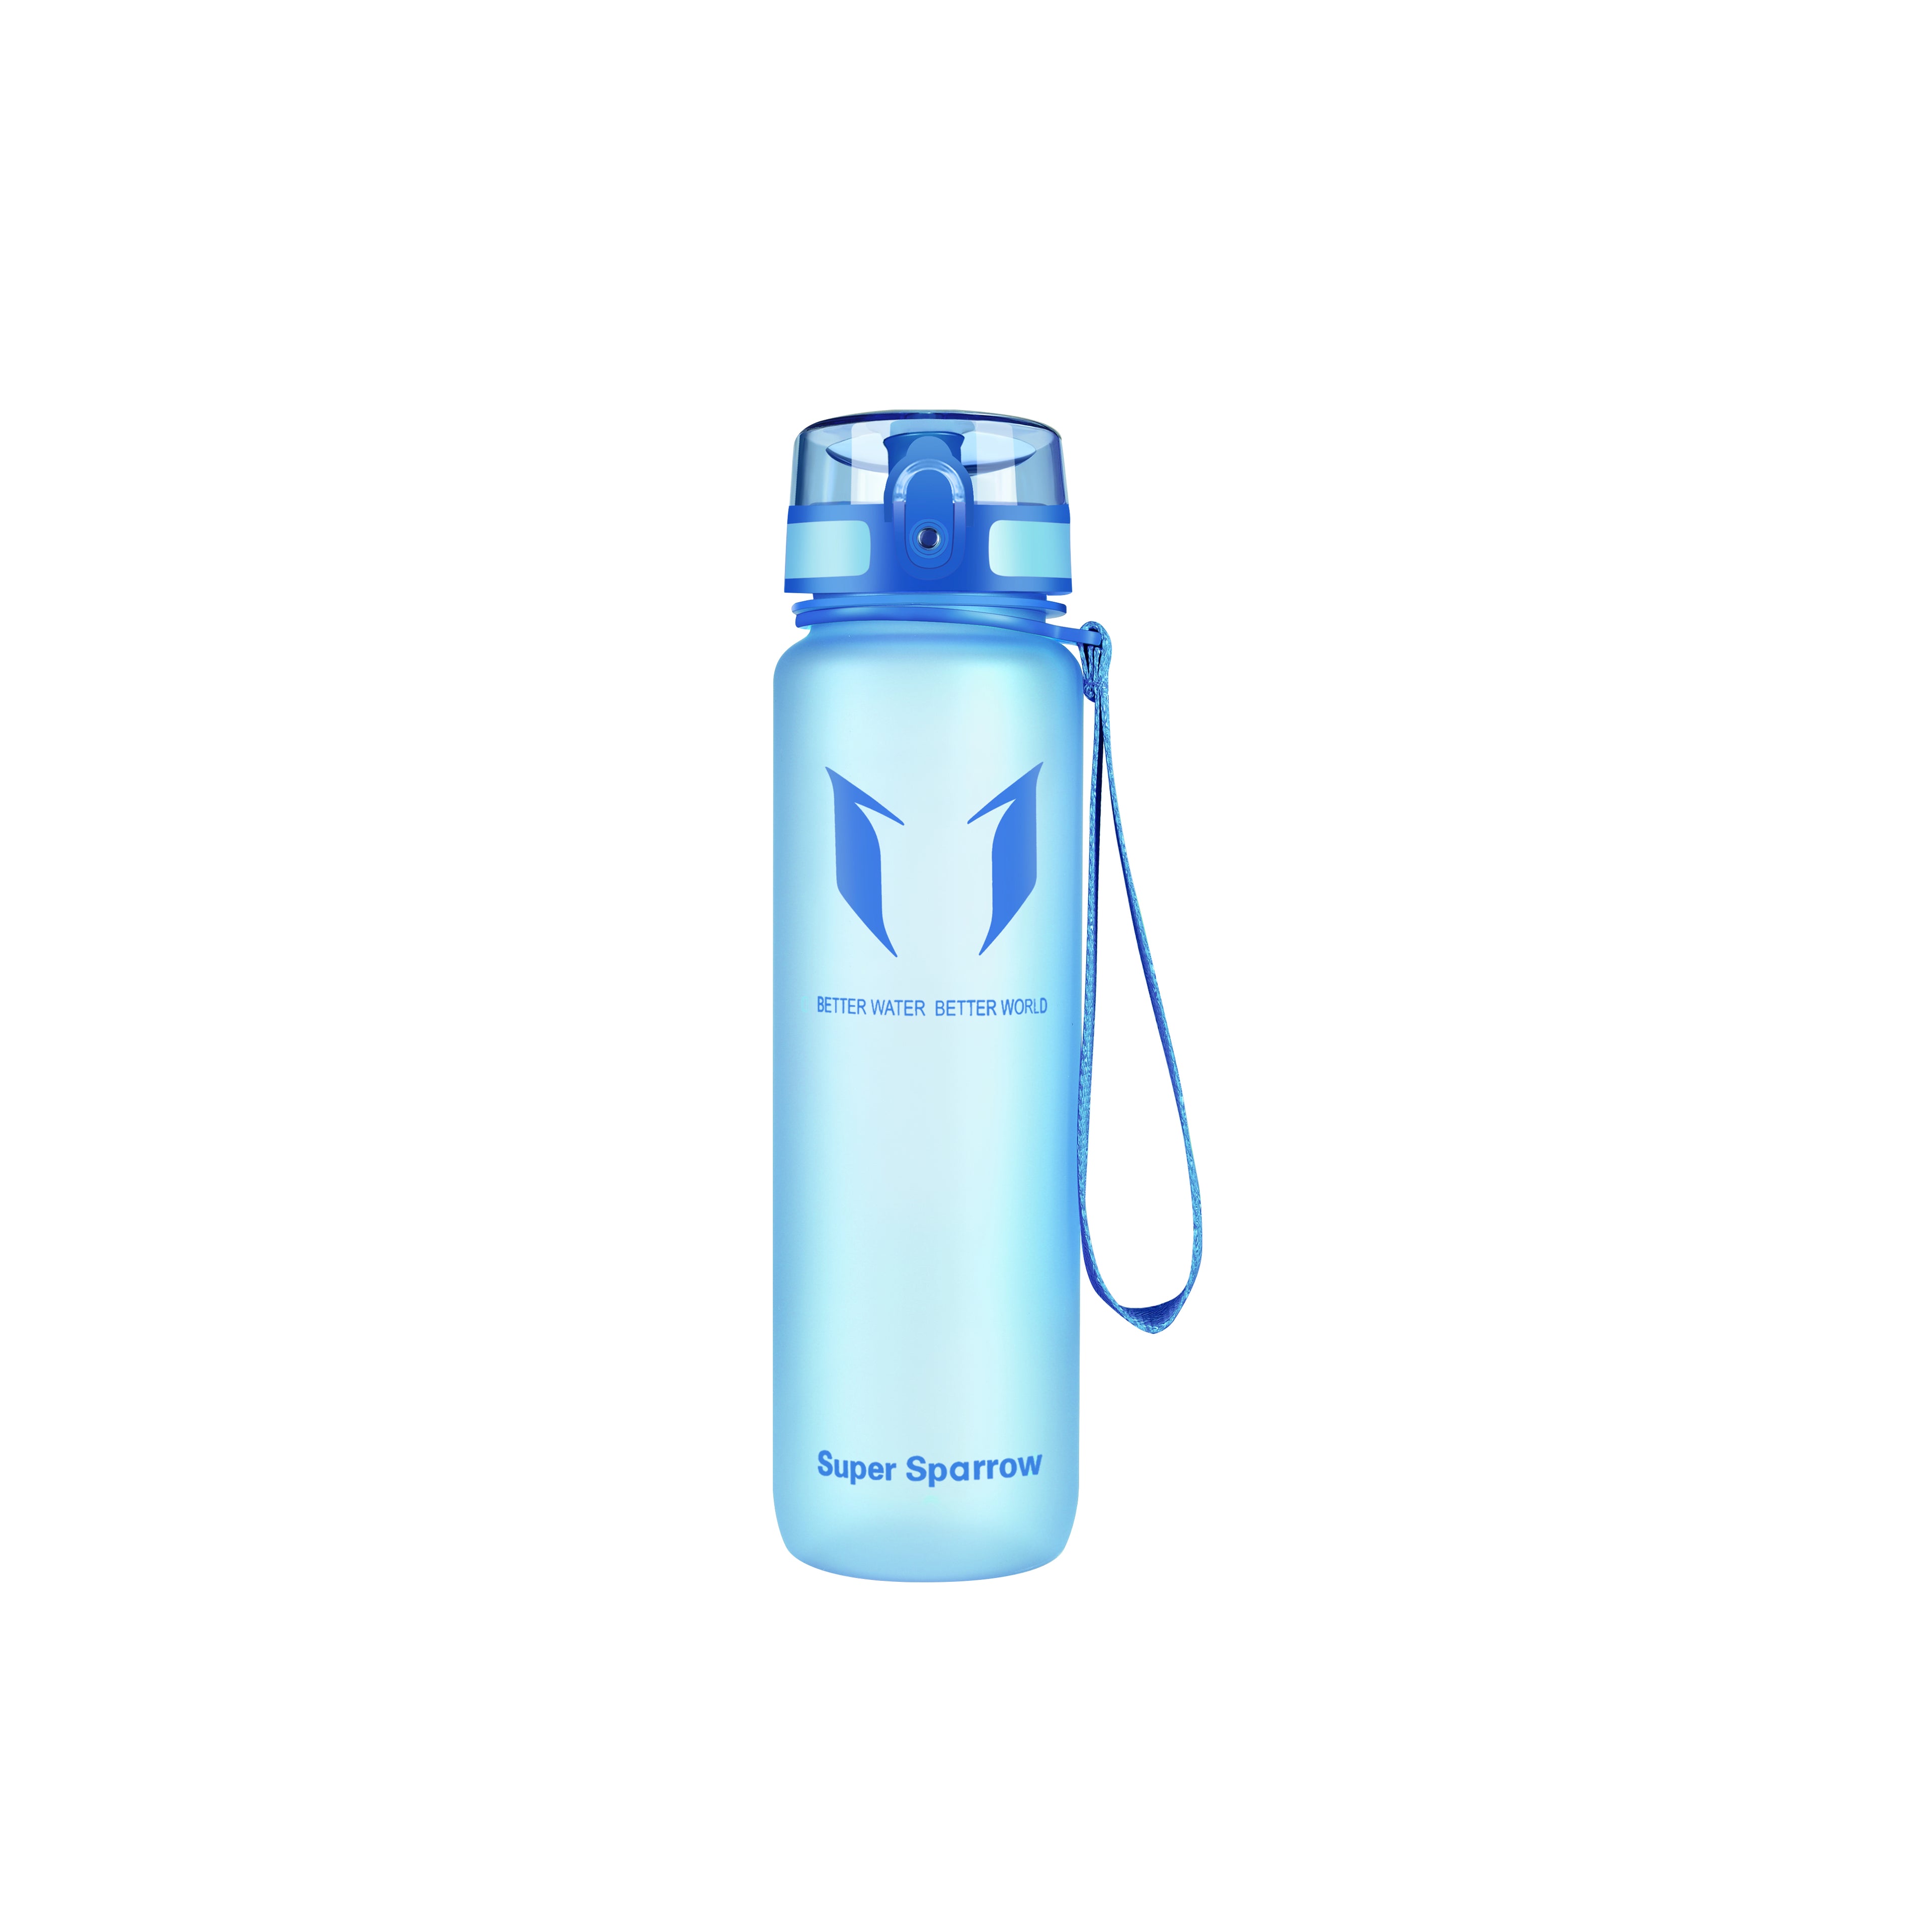  Super Sparrow Sports Water Bottle - 350ml & 500ml & 750ml &  1000ml - Non-Toxic BPA Free & Eco-Friendly Tritan Co-Polyester Plastic -  For Running, Gym, Yoga, Outdoors and Camping 